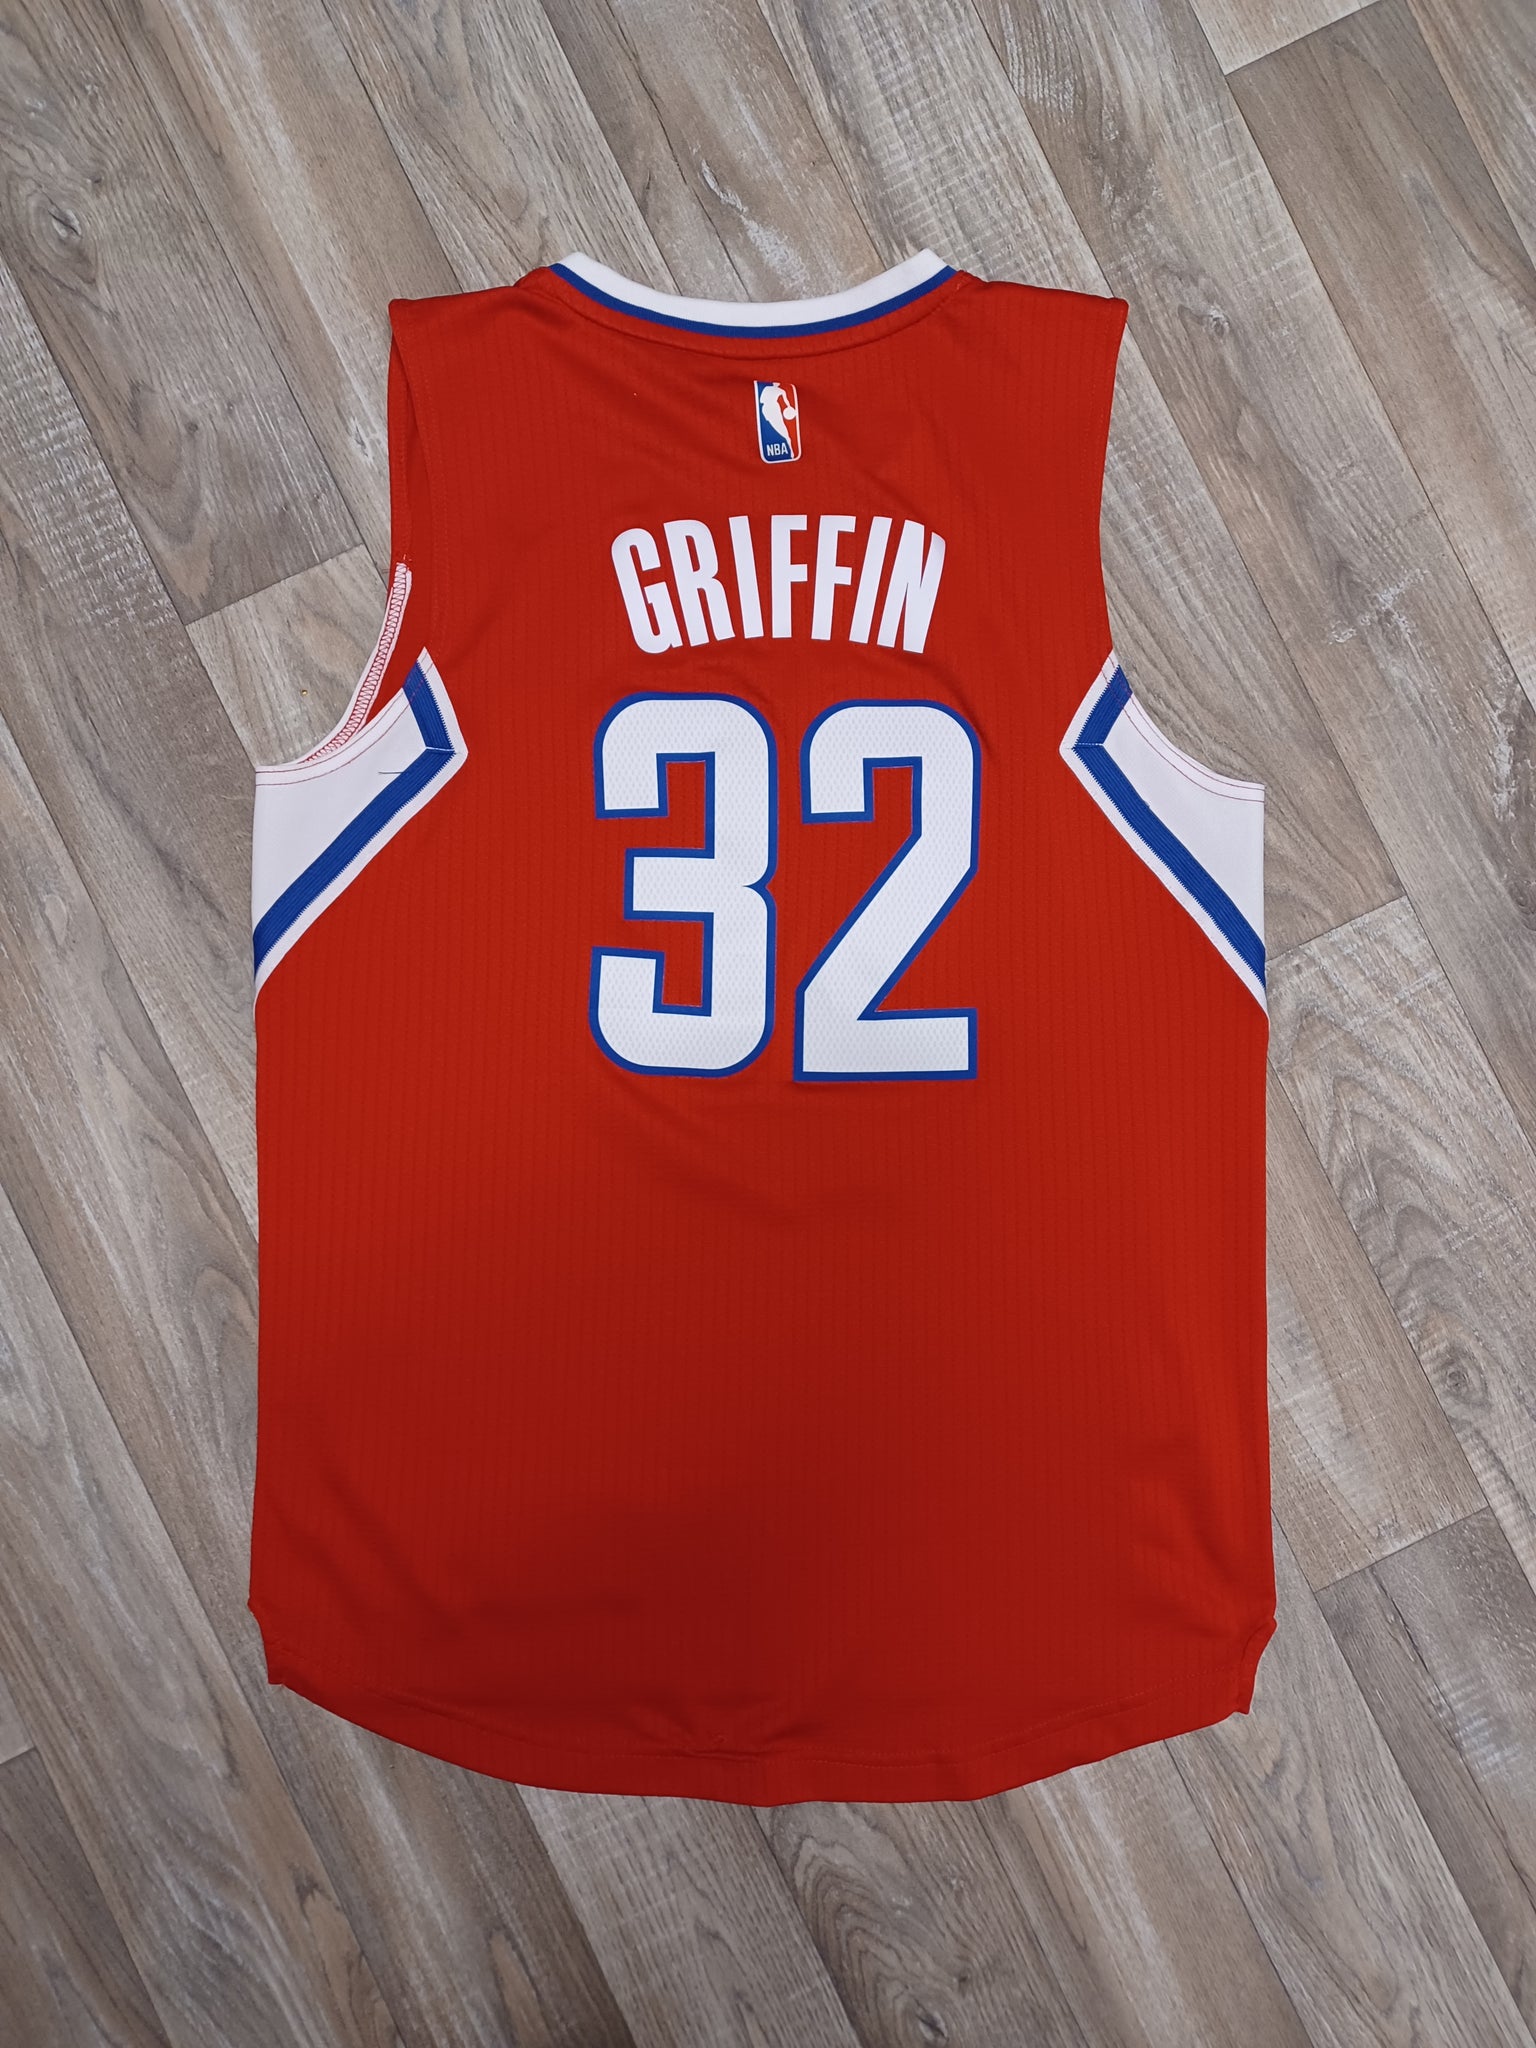 🏀 Blake Griffin Los Angeles Clippers Jersey Size Small – The